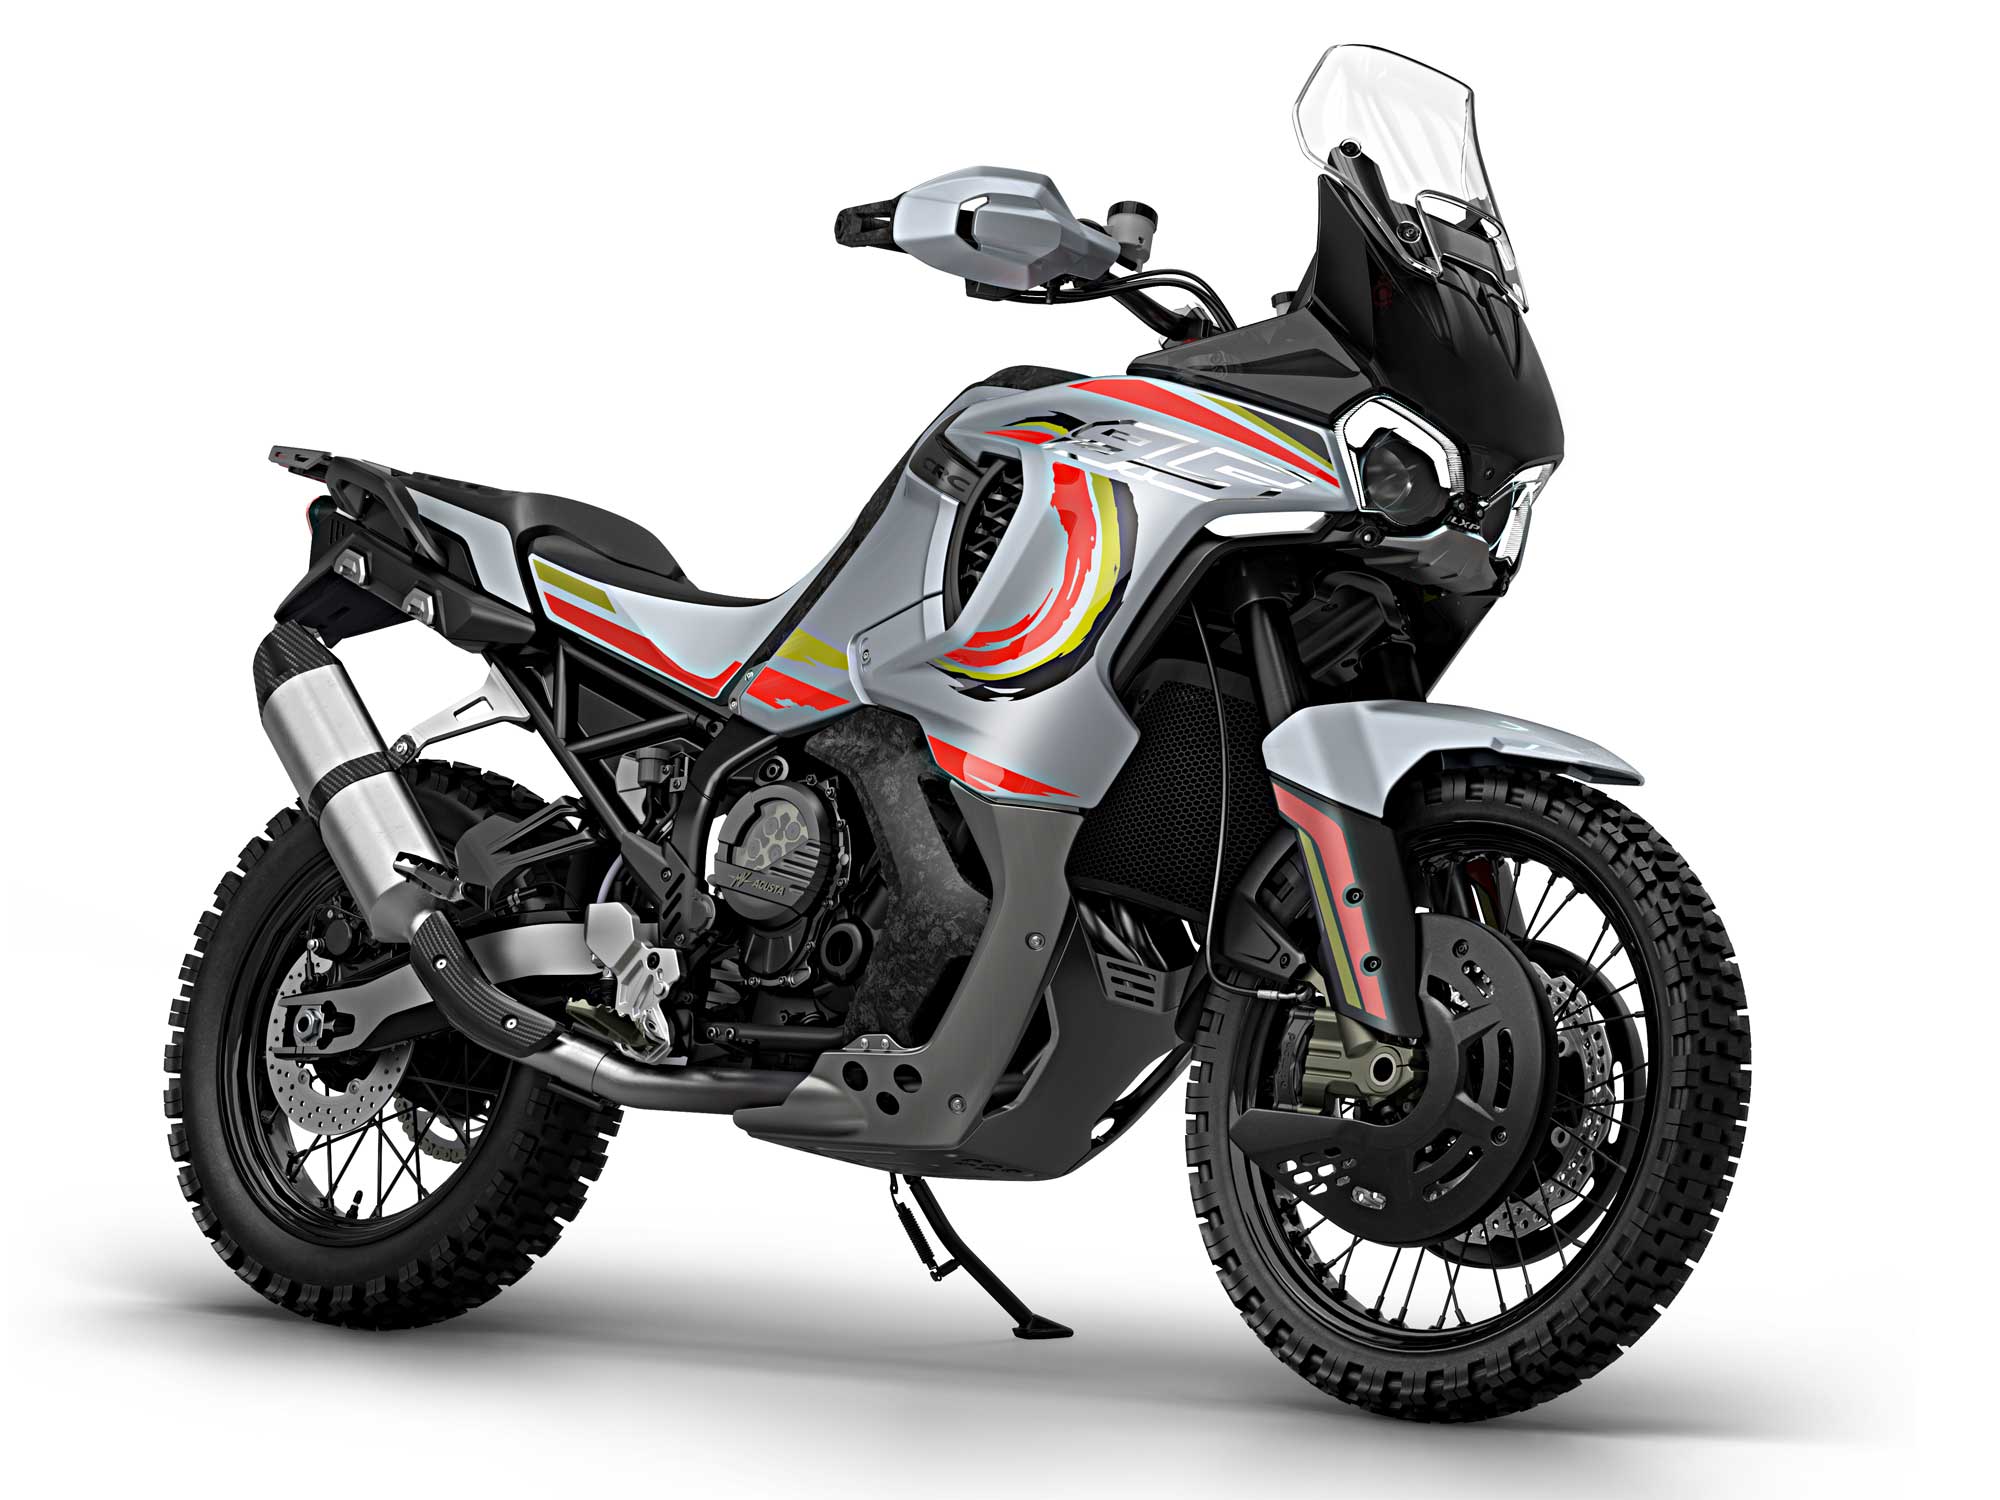 Chinese Motorcycle Builder Loncin Unveils New ADV Bike